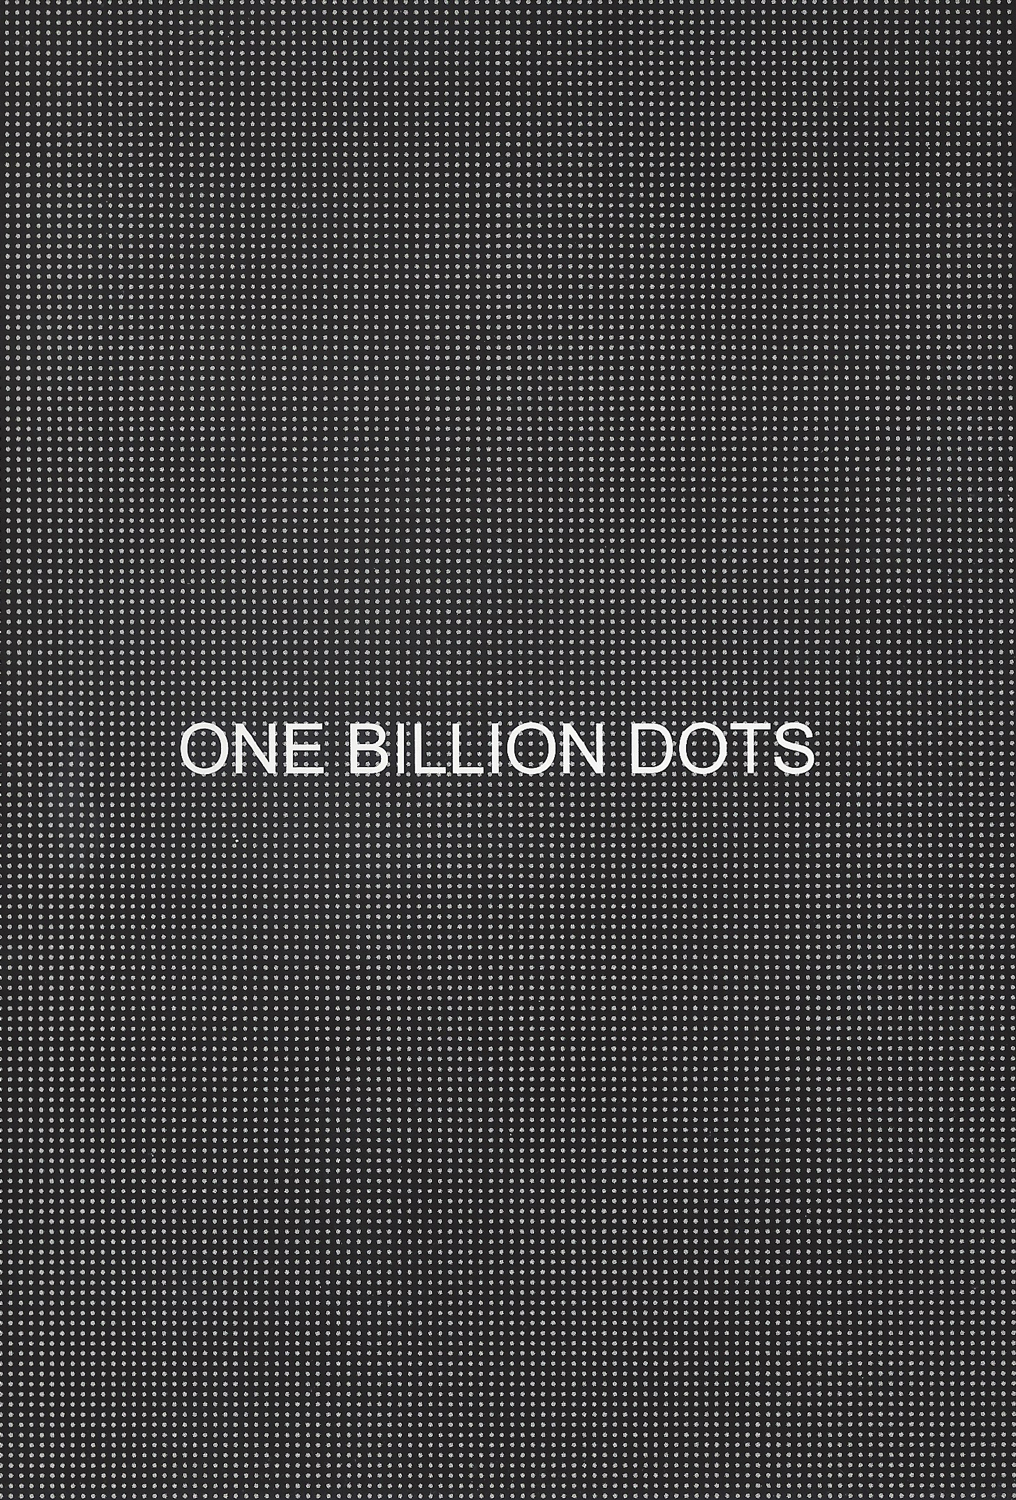 One in a Billion